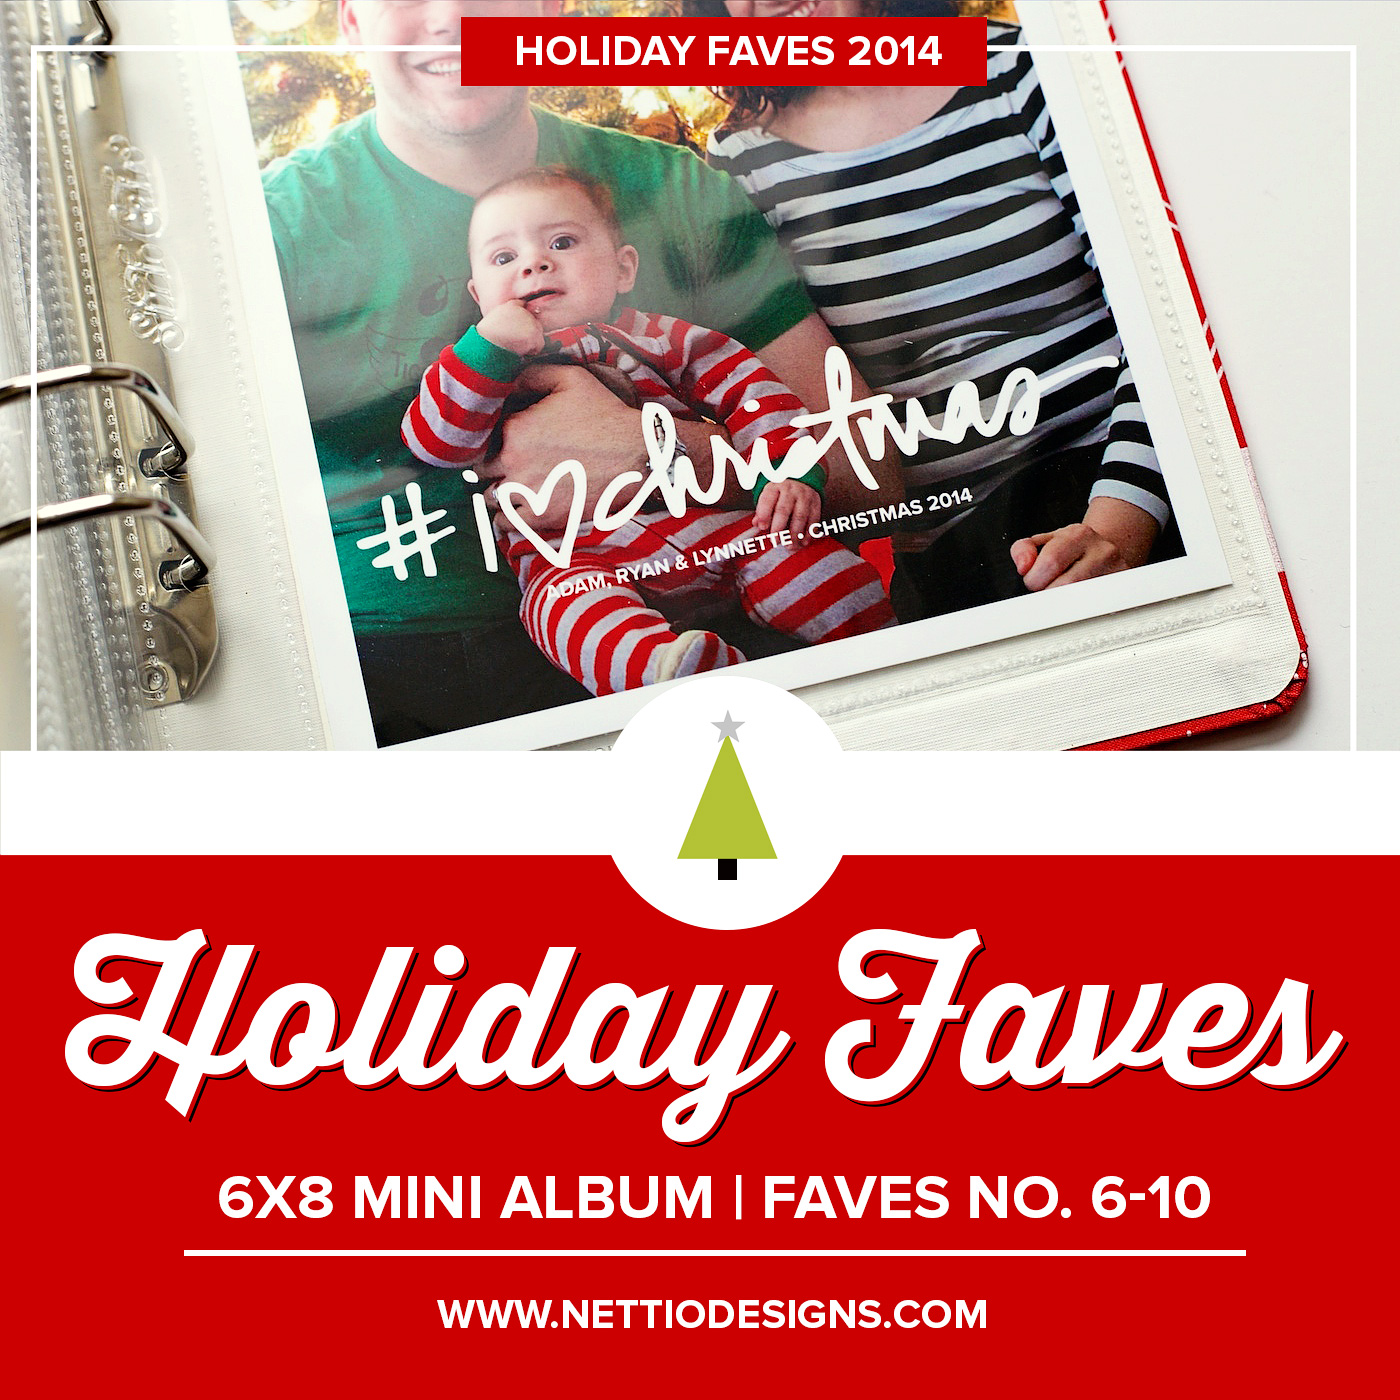 nettiodesigns_Holiday-Faves-2014-intro-2